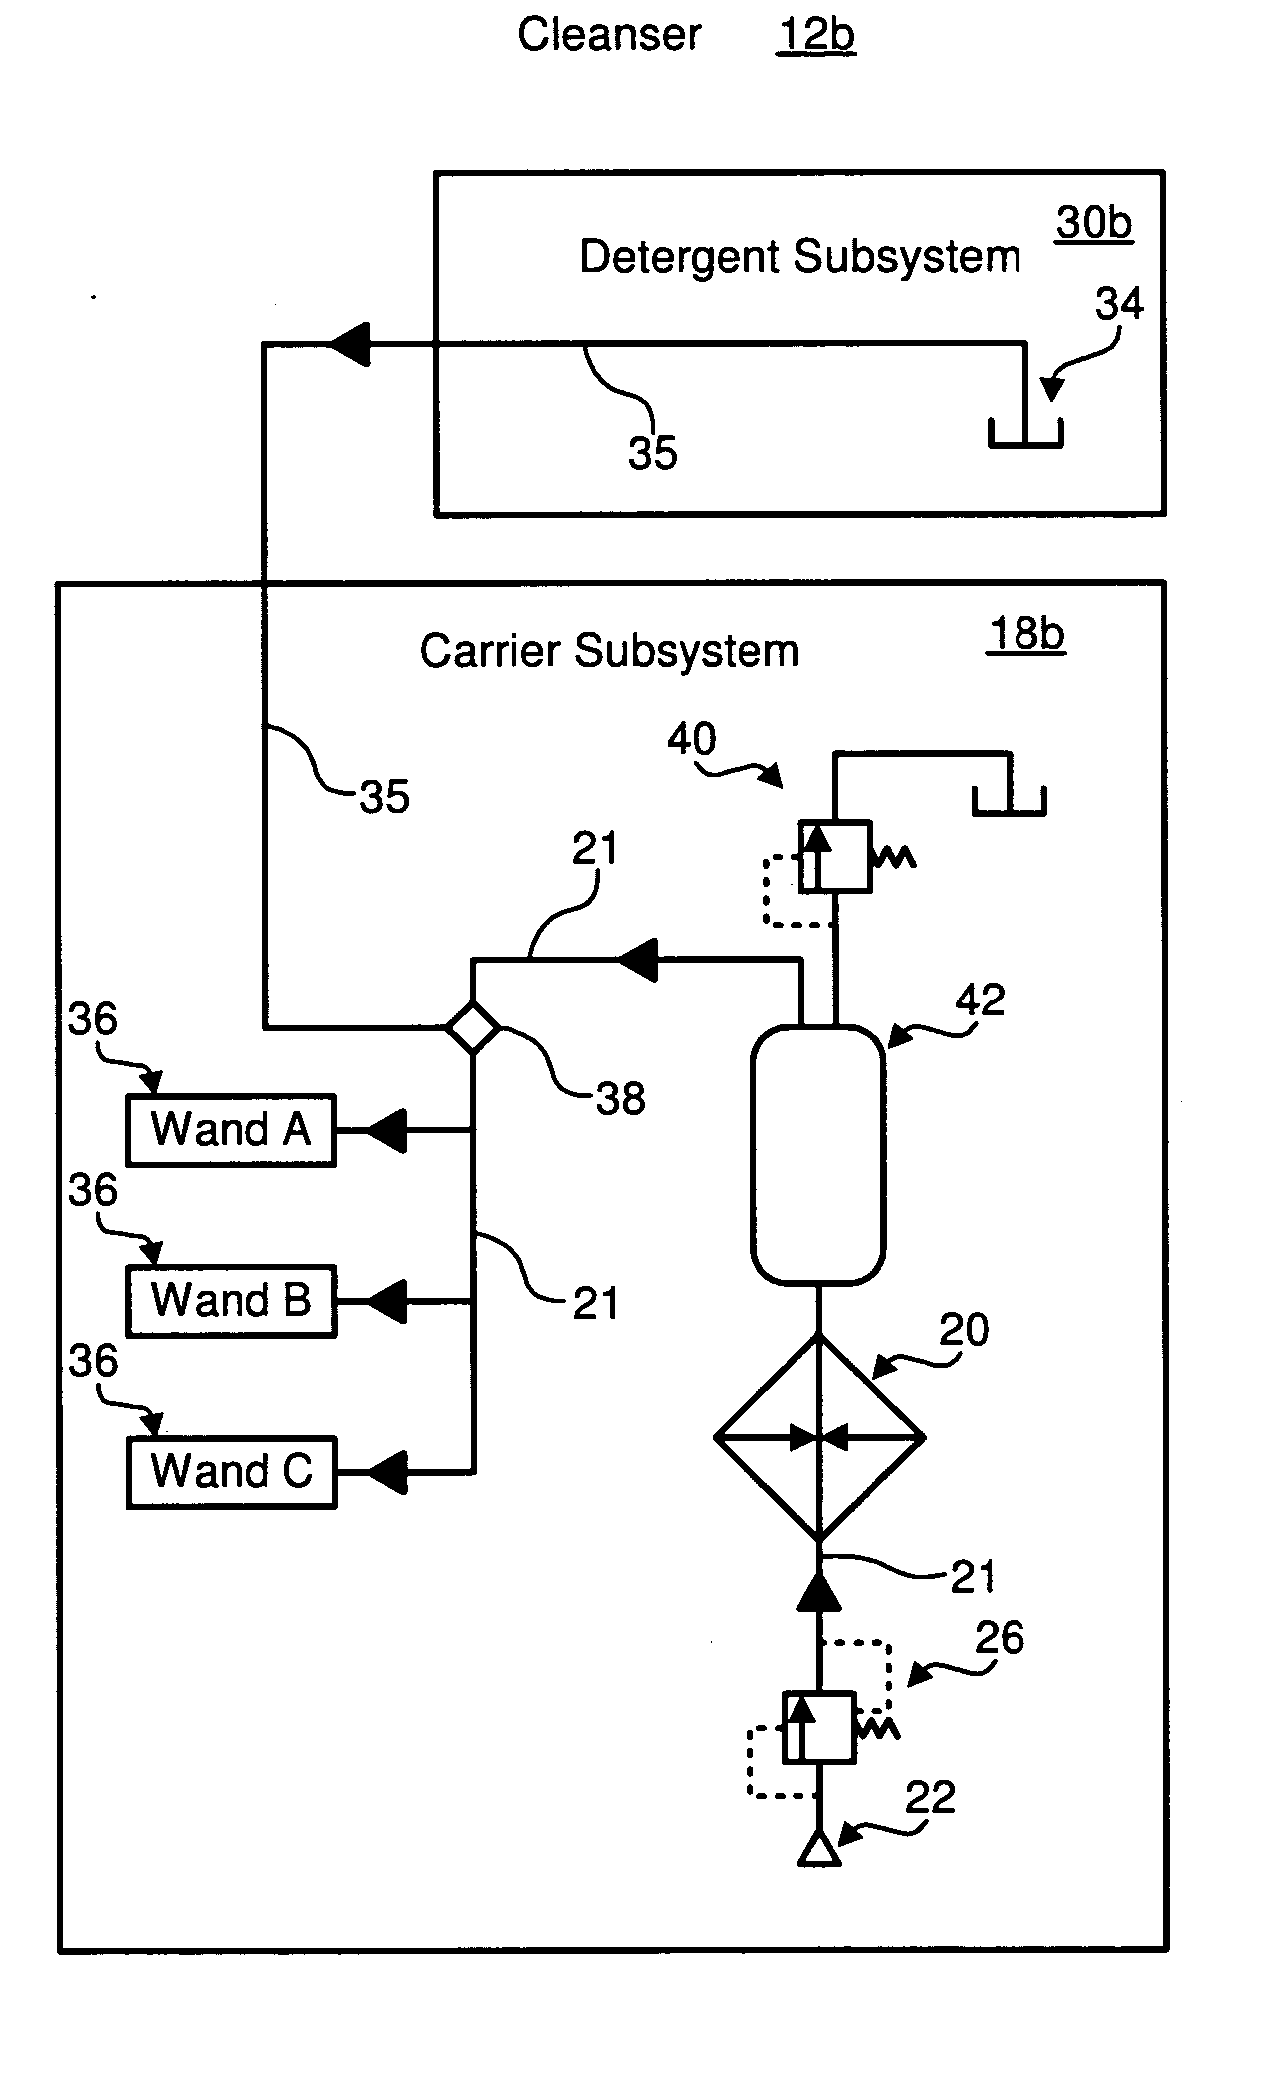 Integrated cleaning apparatus and methods